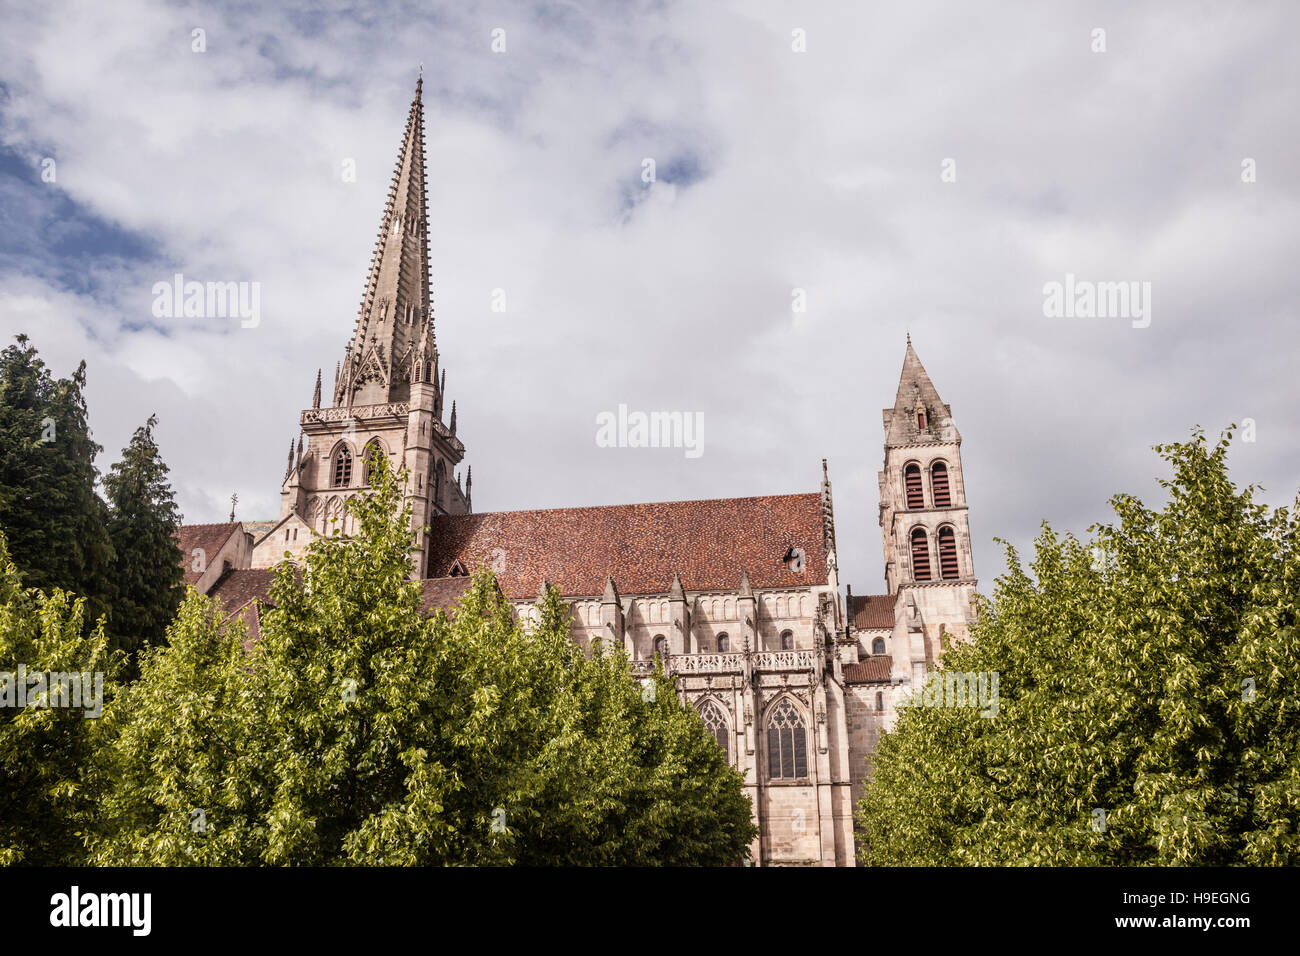 The cathedral of Saint Lazare in Autun, France. Stock Photo